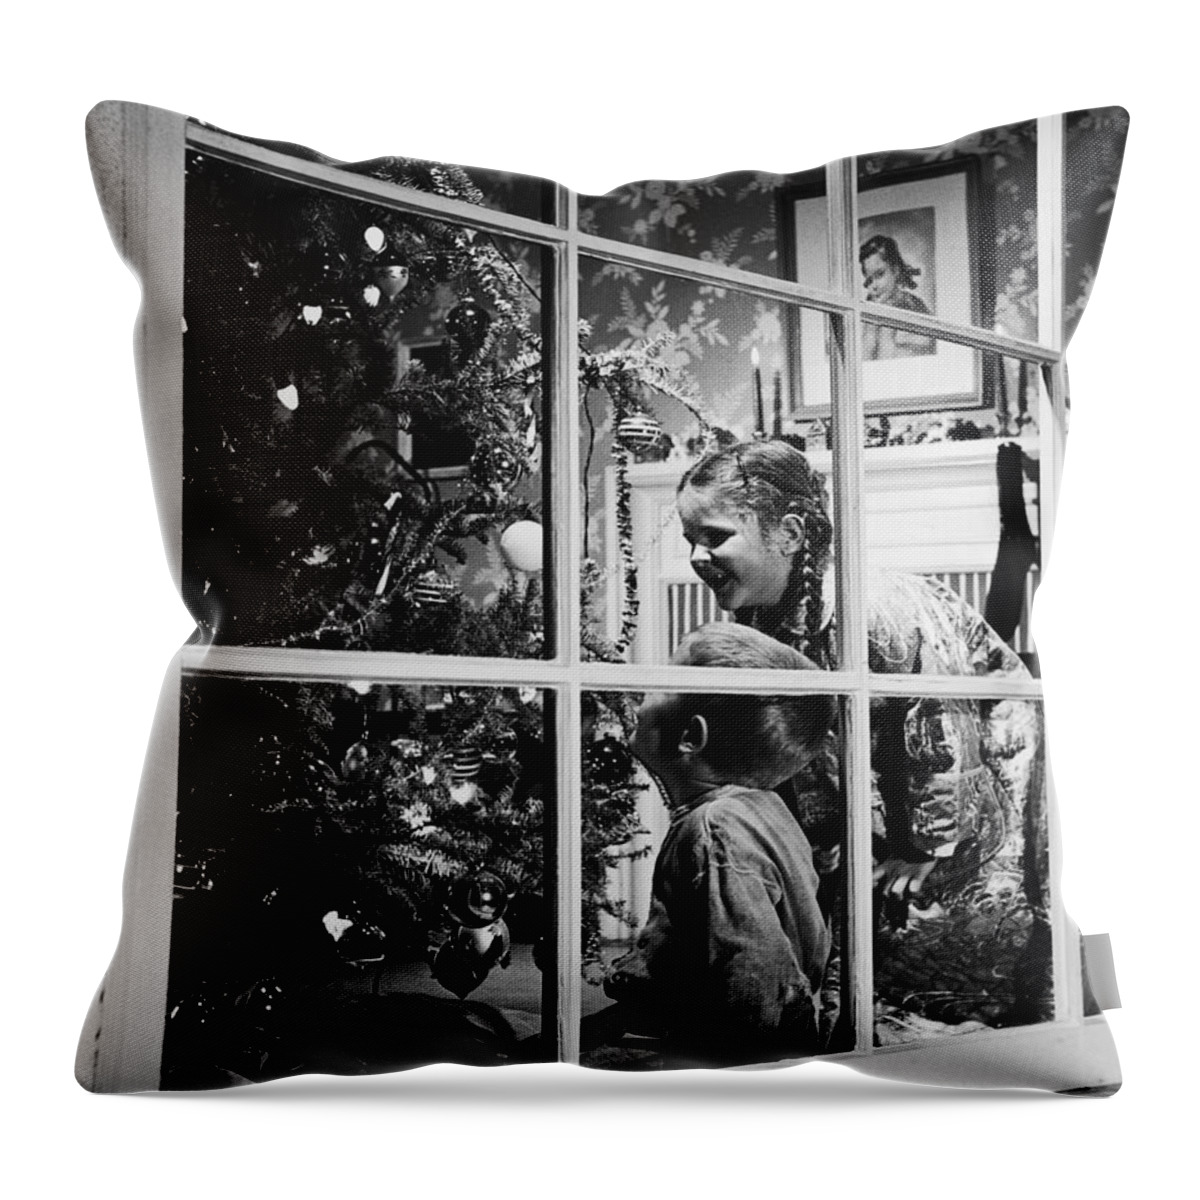 Child Throw Pillow featuring the photograph Boy And Girl 3-8 Looking At Christmas by Fpg